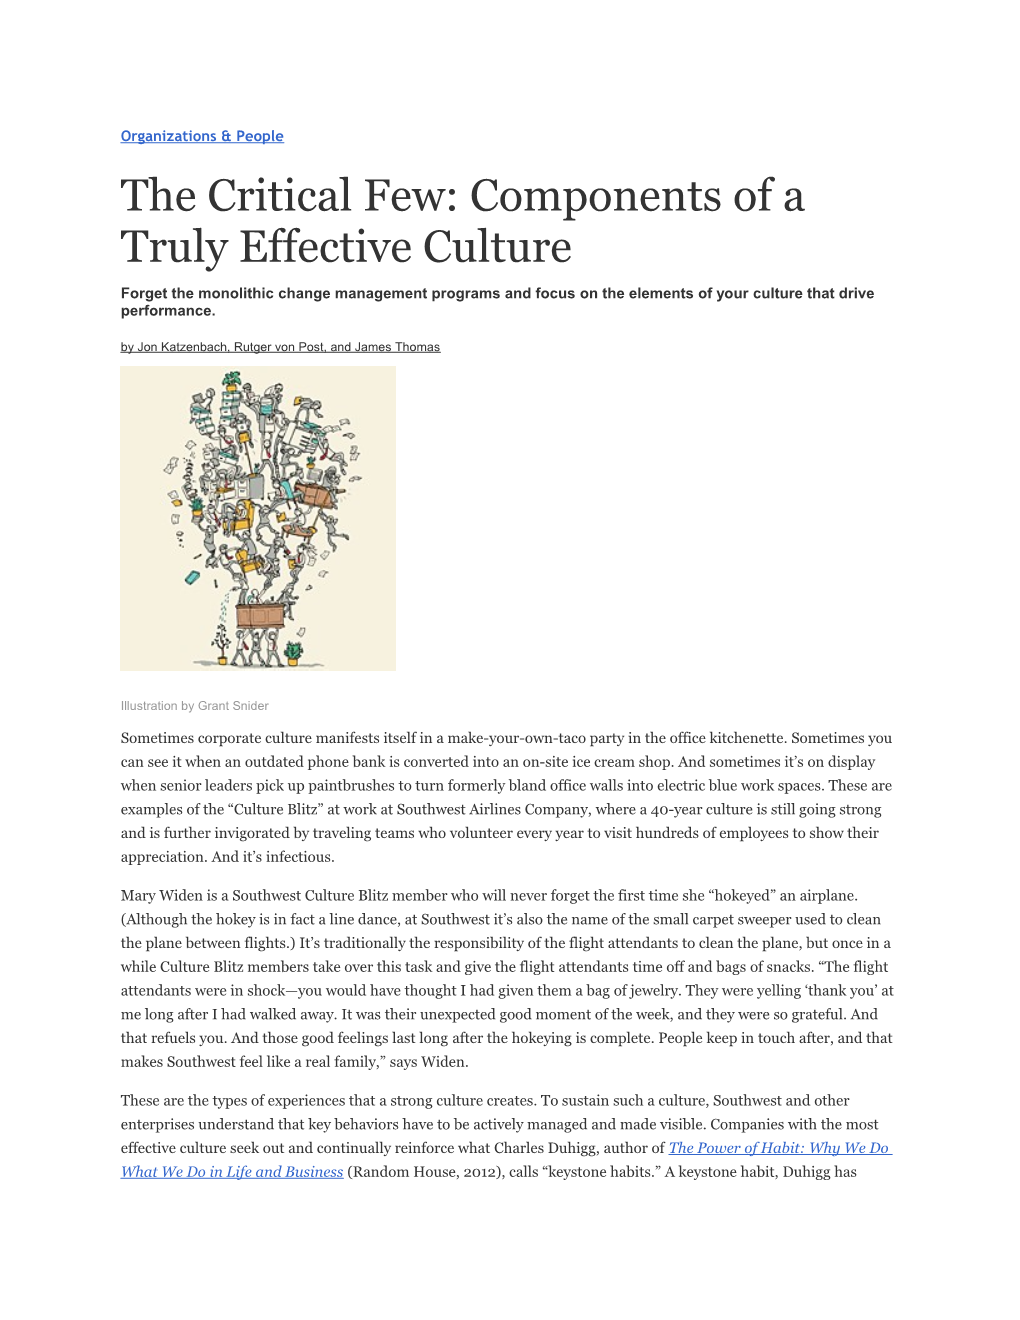 The Critical Few: Components of a Truly Effective Culture